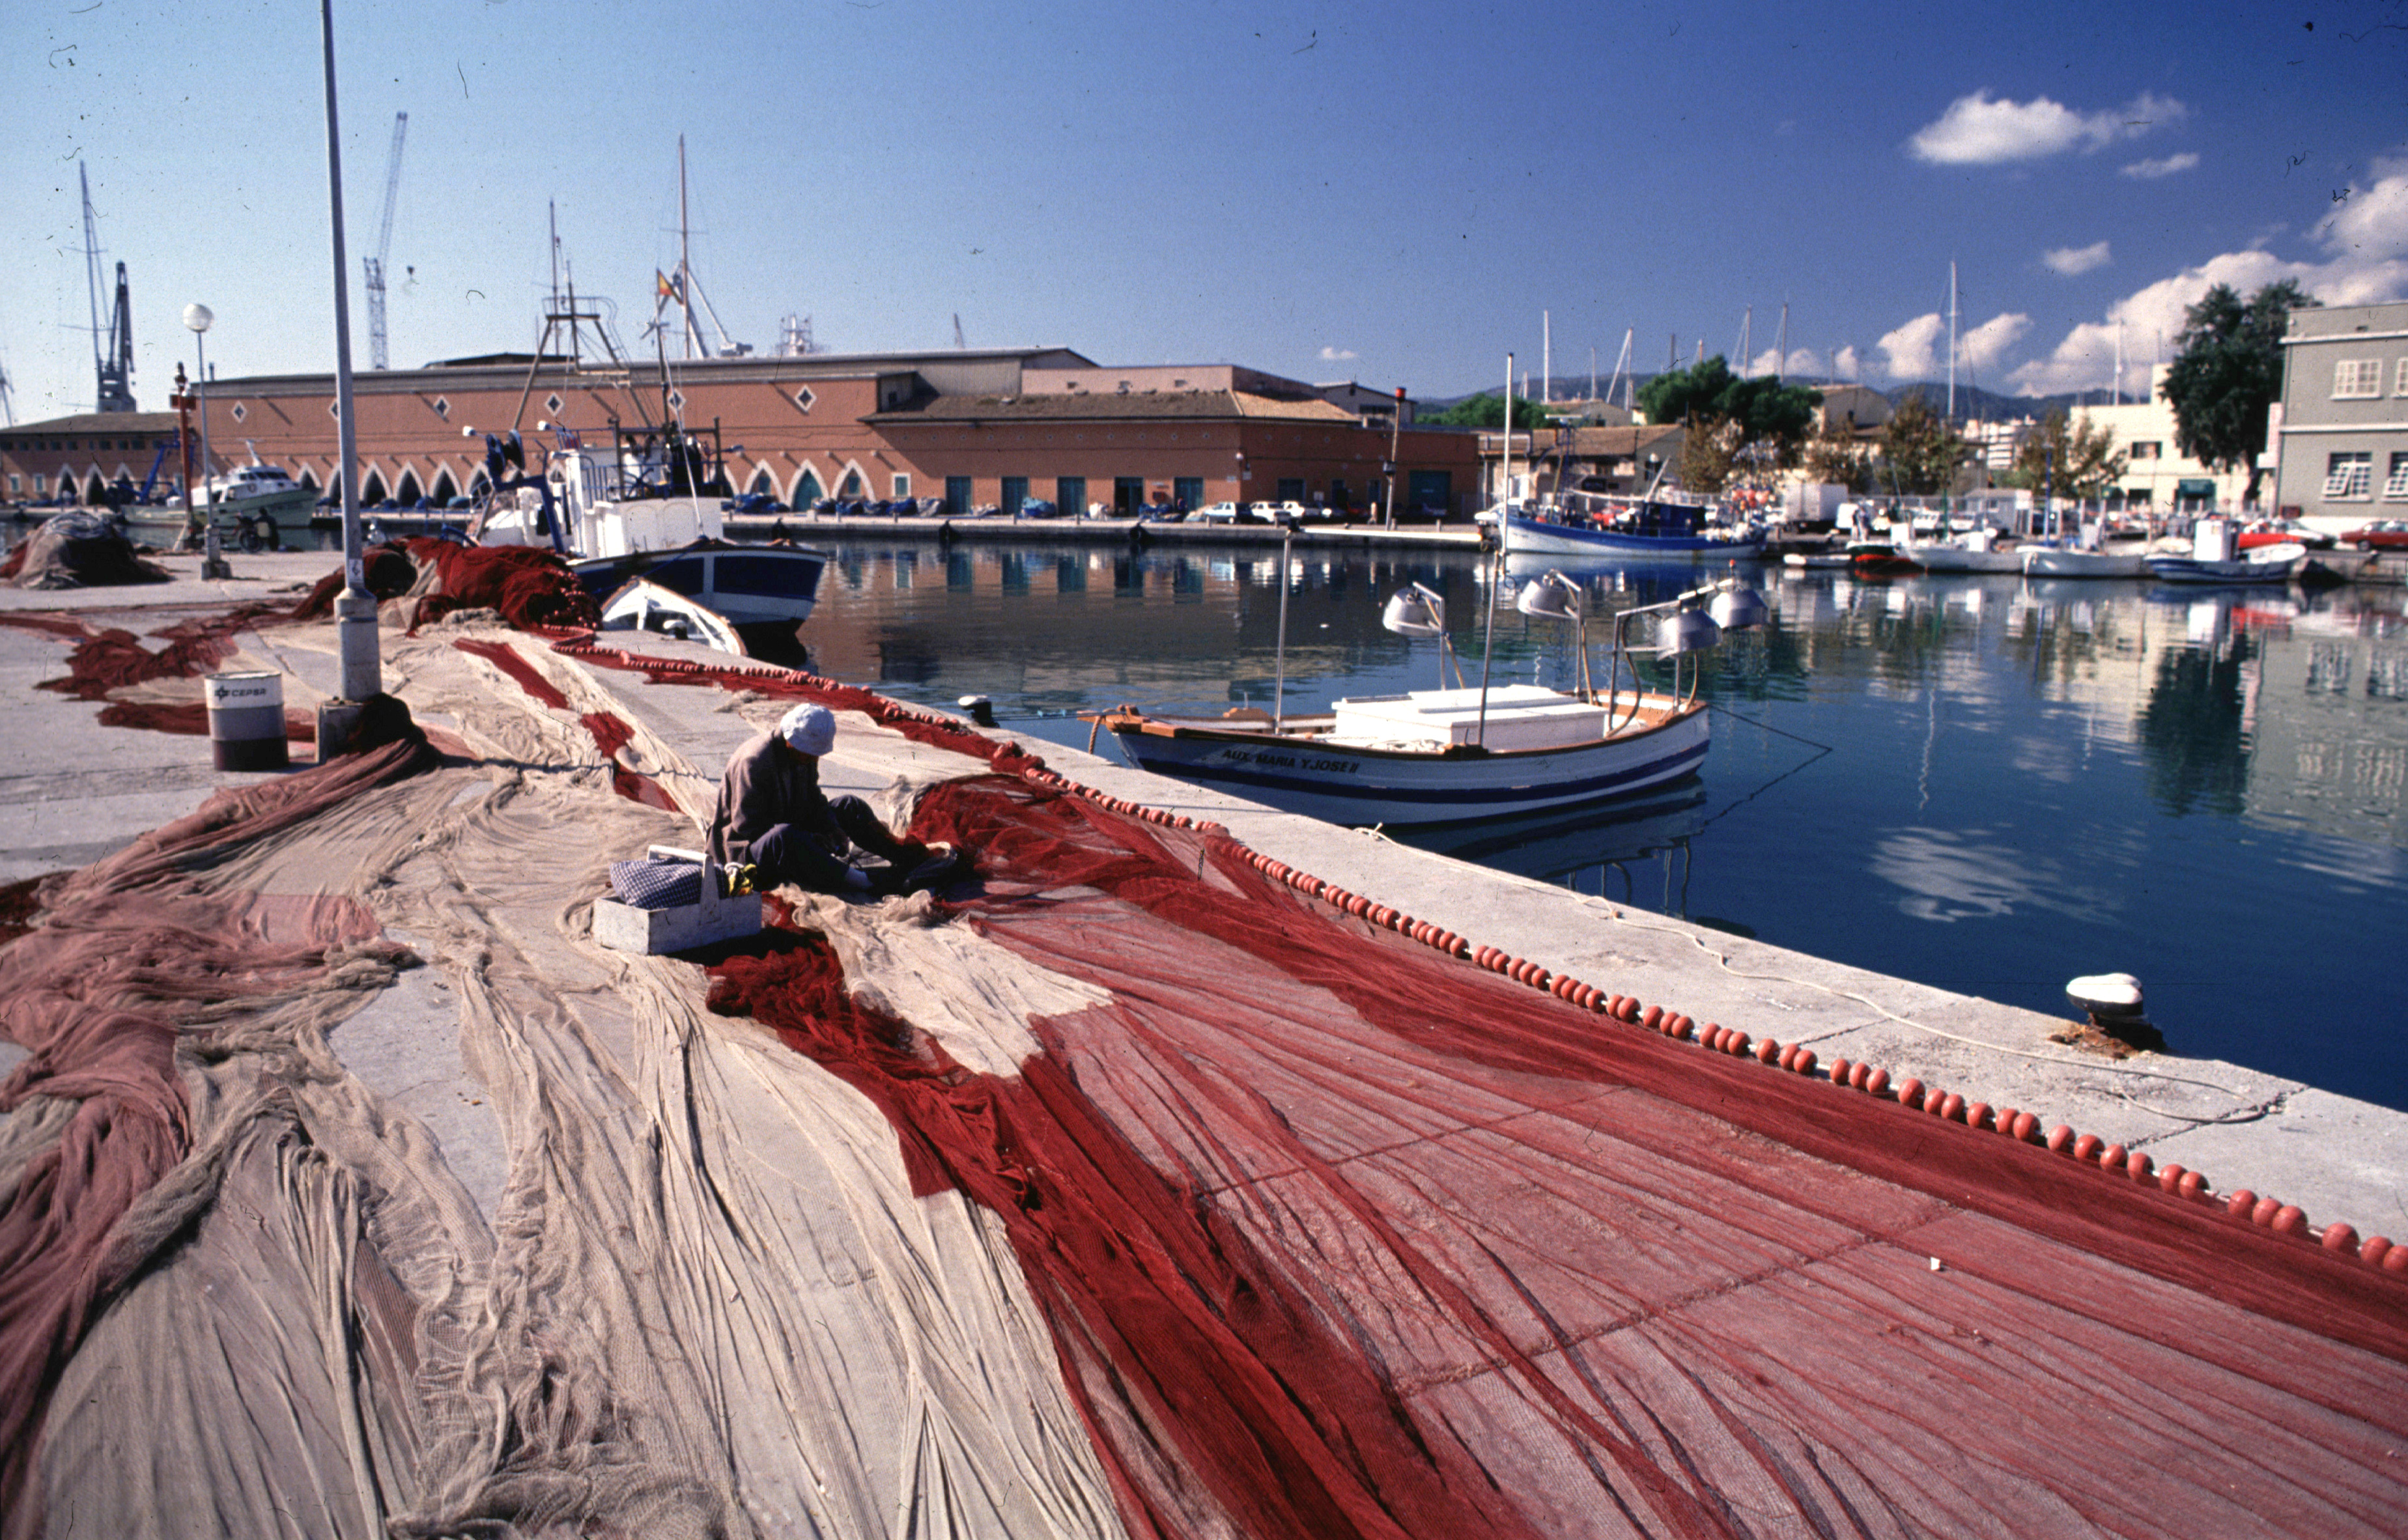 An invitation to tender is issued for the management of the Fish Market on the Contramuelle-Mollet quay in the port of Palma